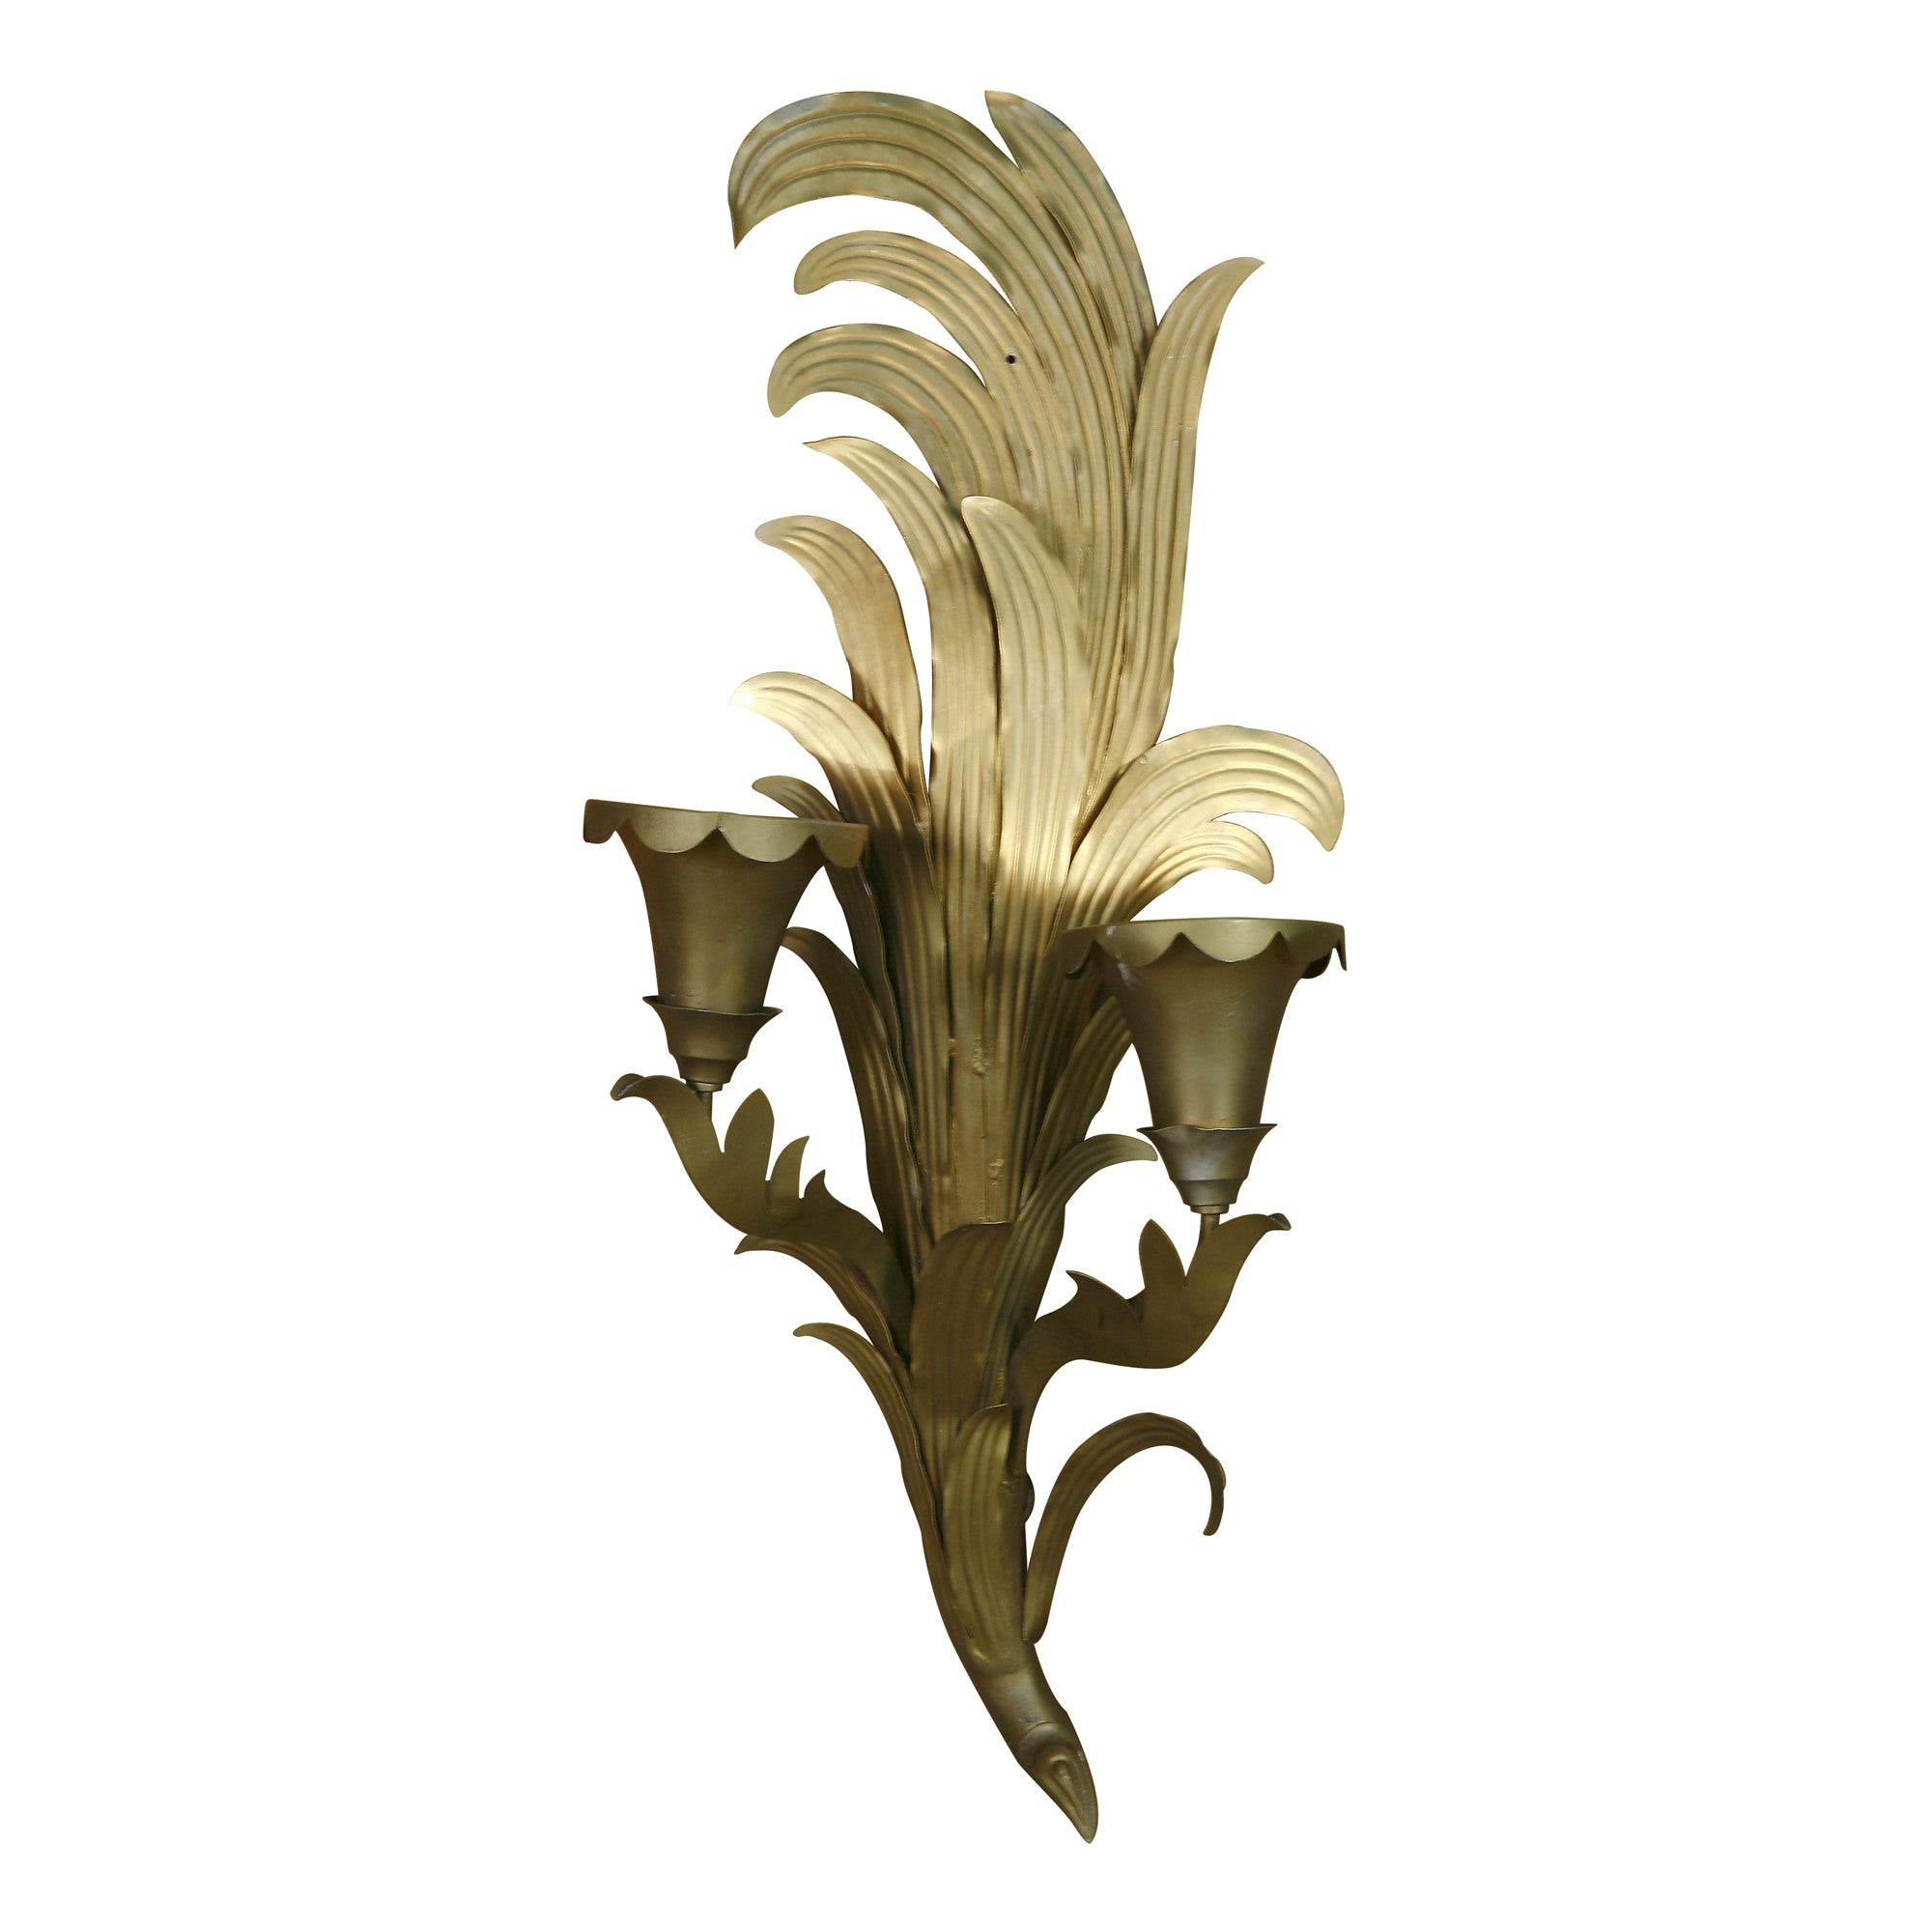 Large-Scale Art Deco Gilt Palm Sconce from Historic May Department Store